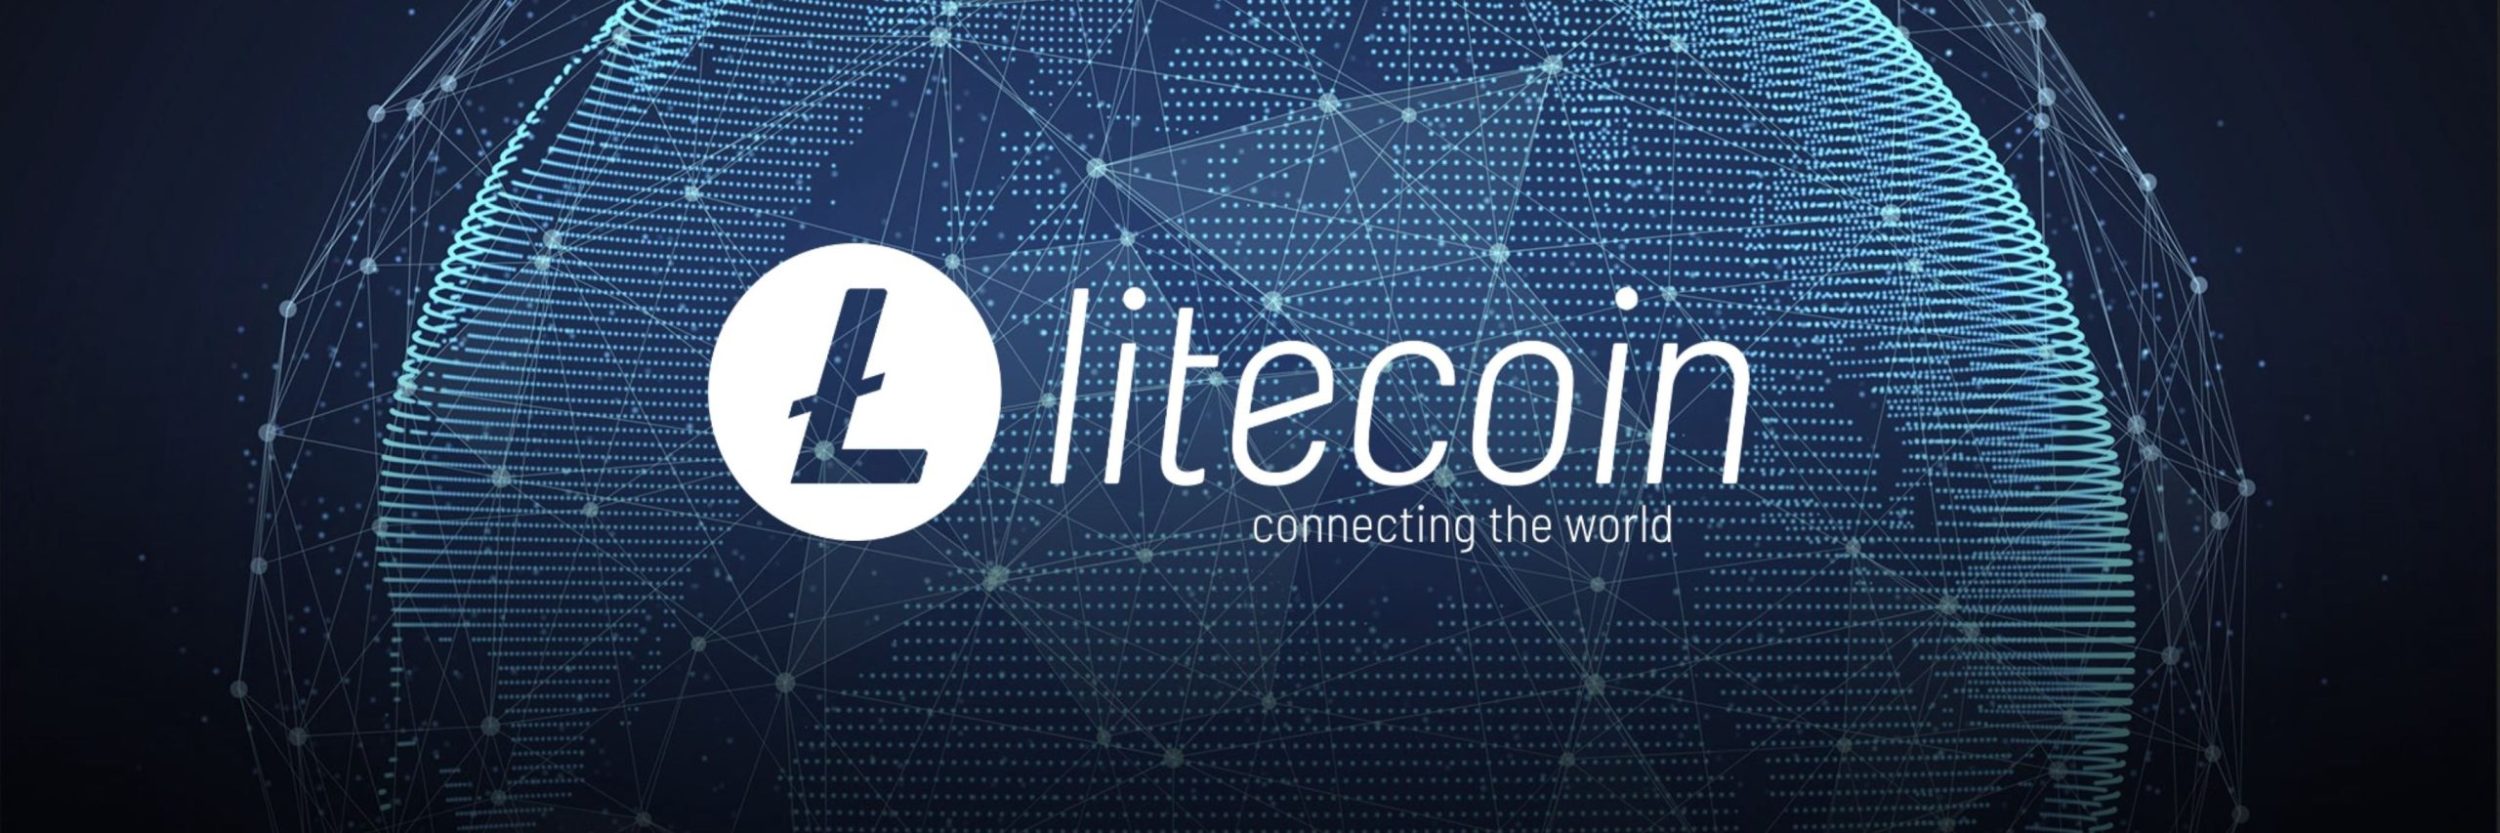 Litecoin (LTC/USD) Price Is Under a Force, Attempting a Correction